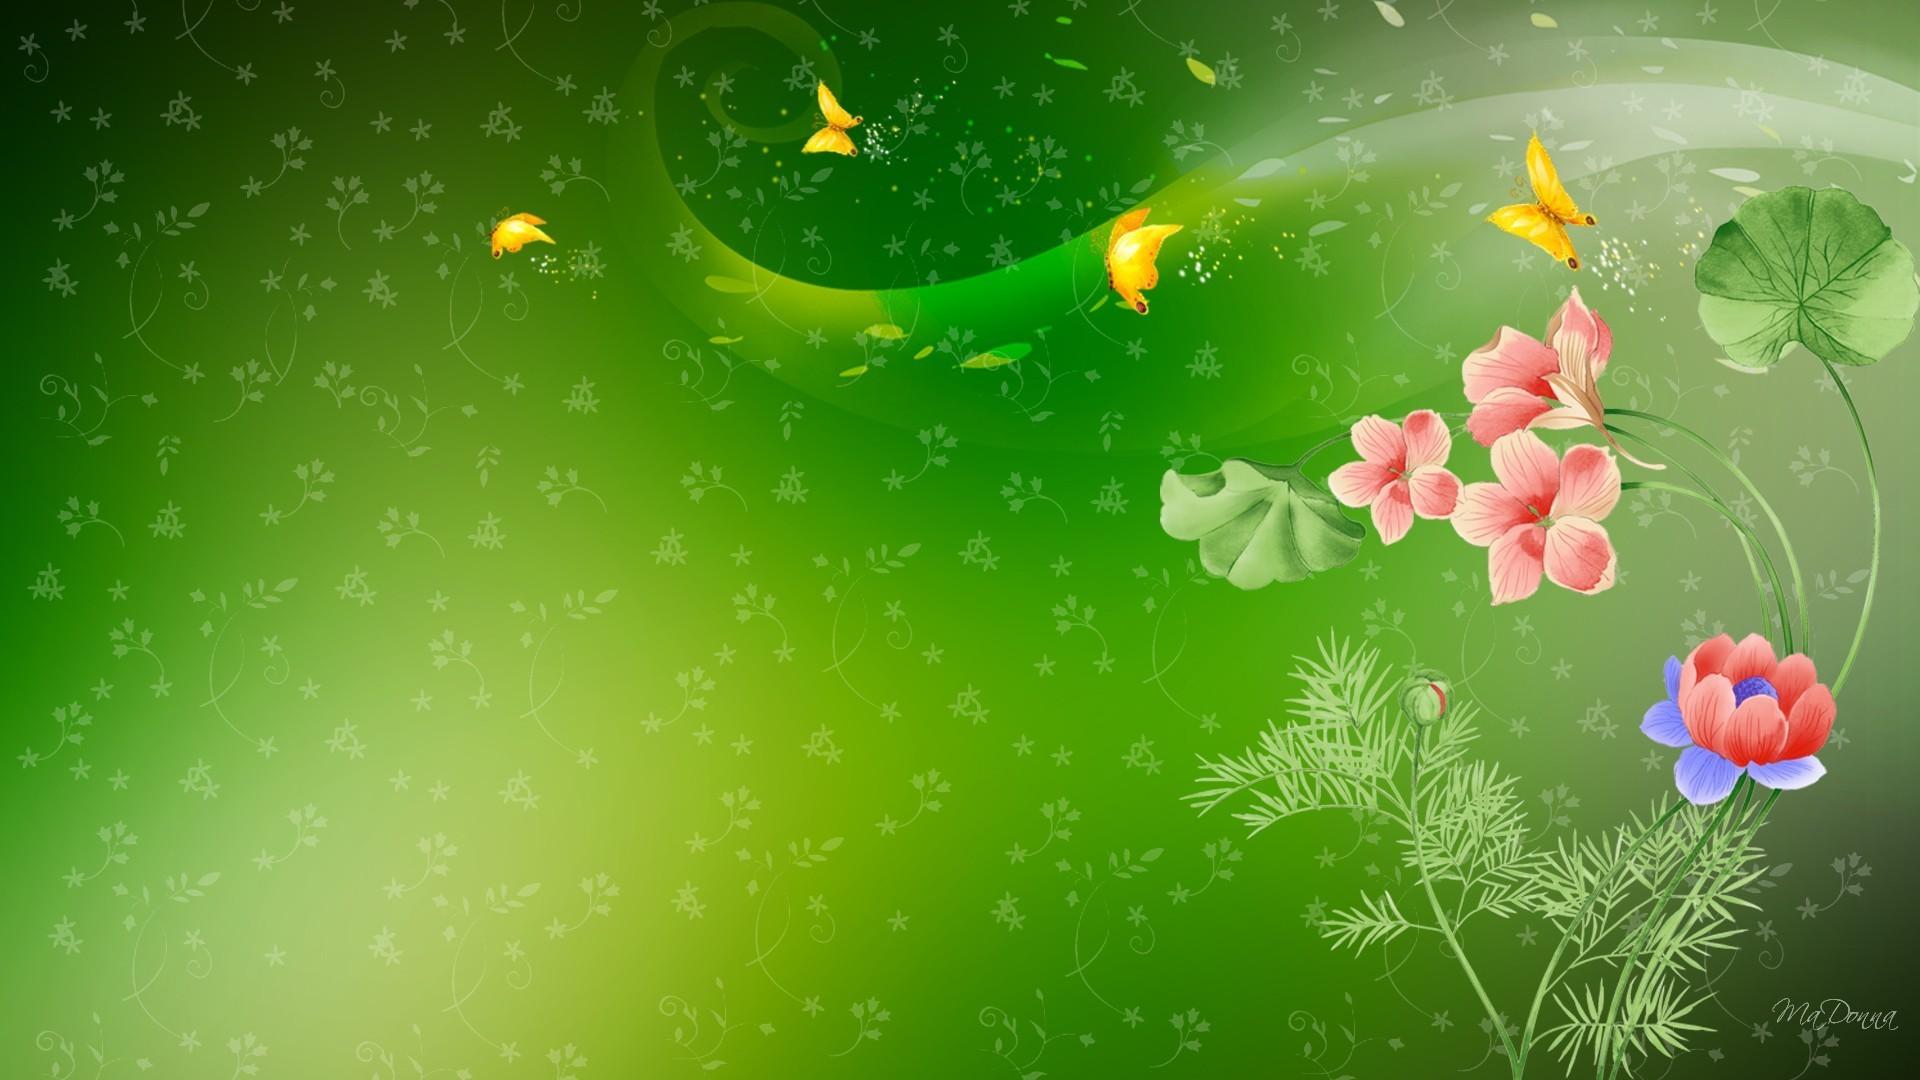 Green Flowers Wallpapers - Wallpaper Cave